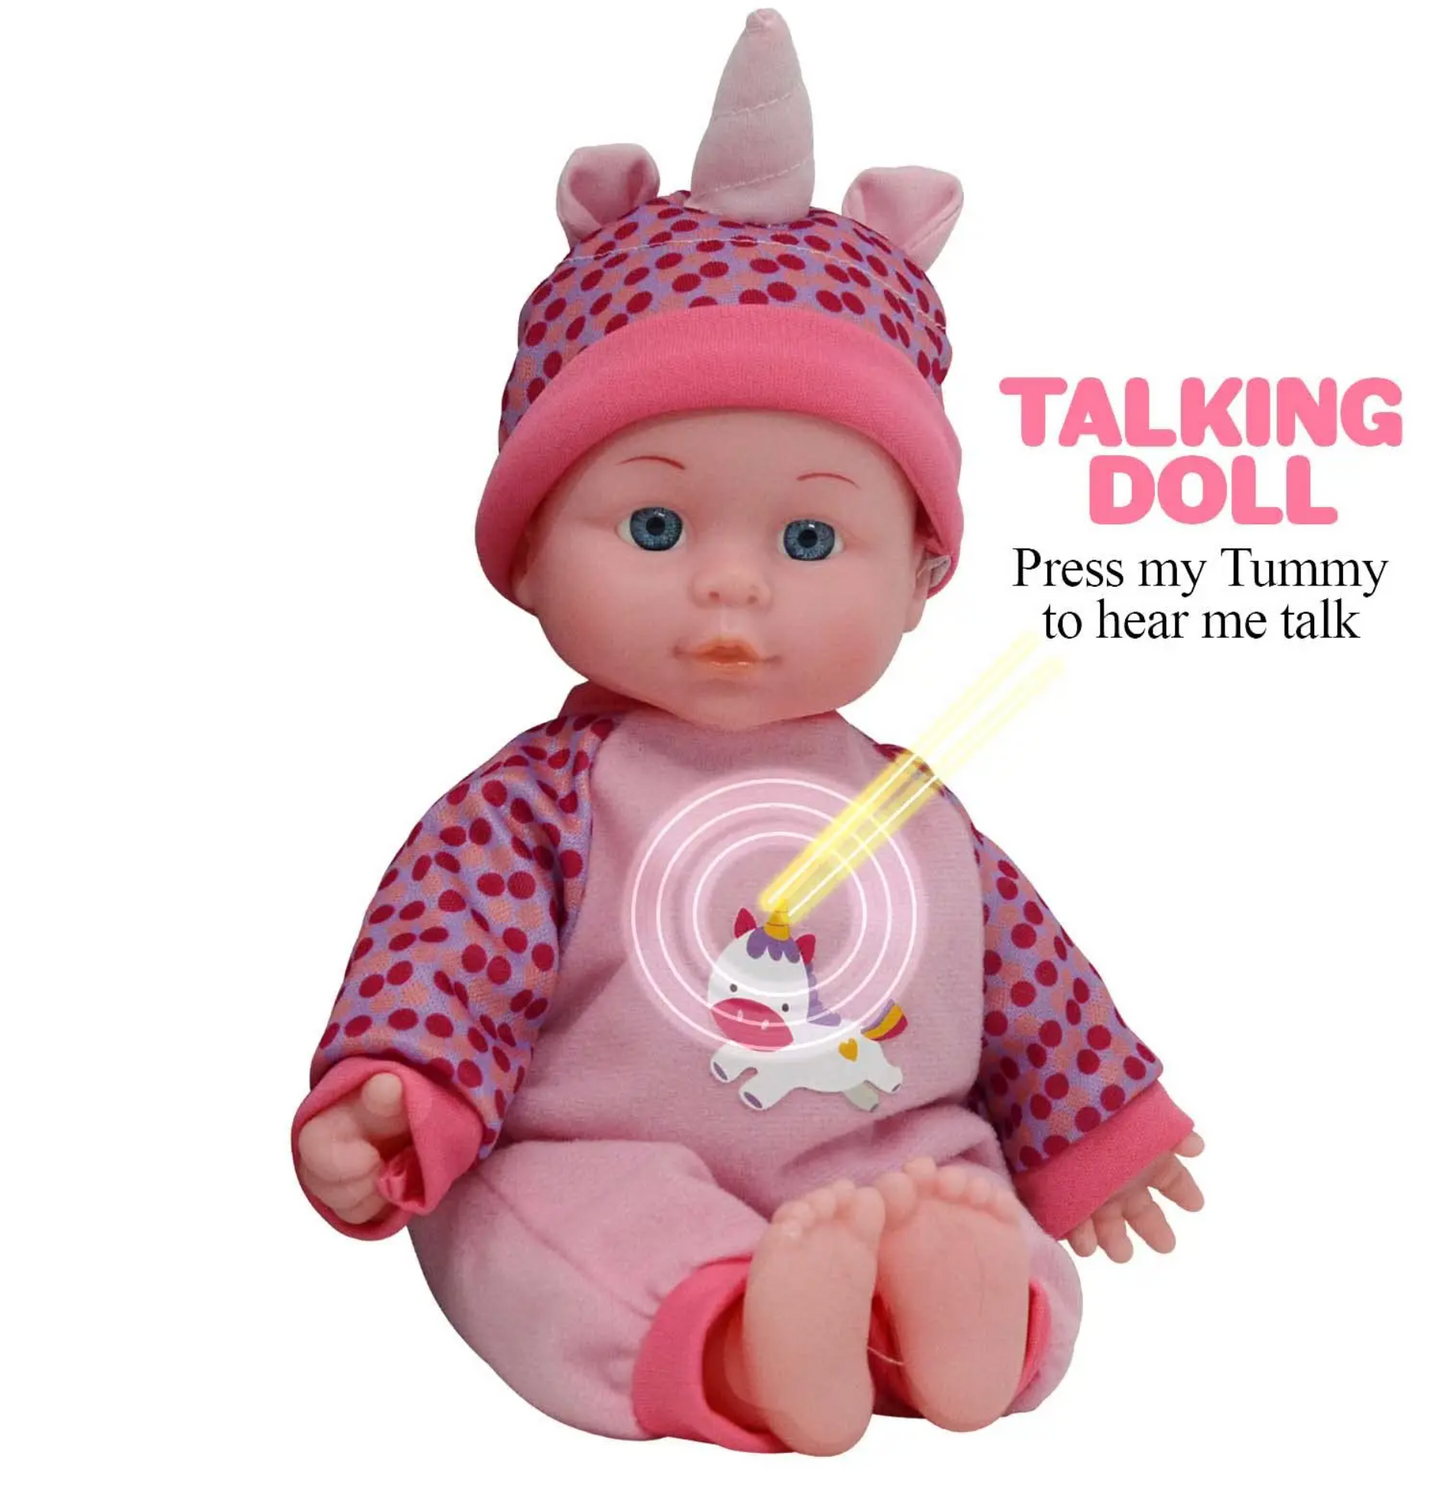 12" SOFT BODY TALK CRY AND SING INTERACTIVE BABY DOLL UNICORN